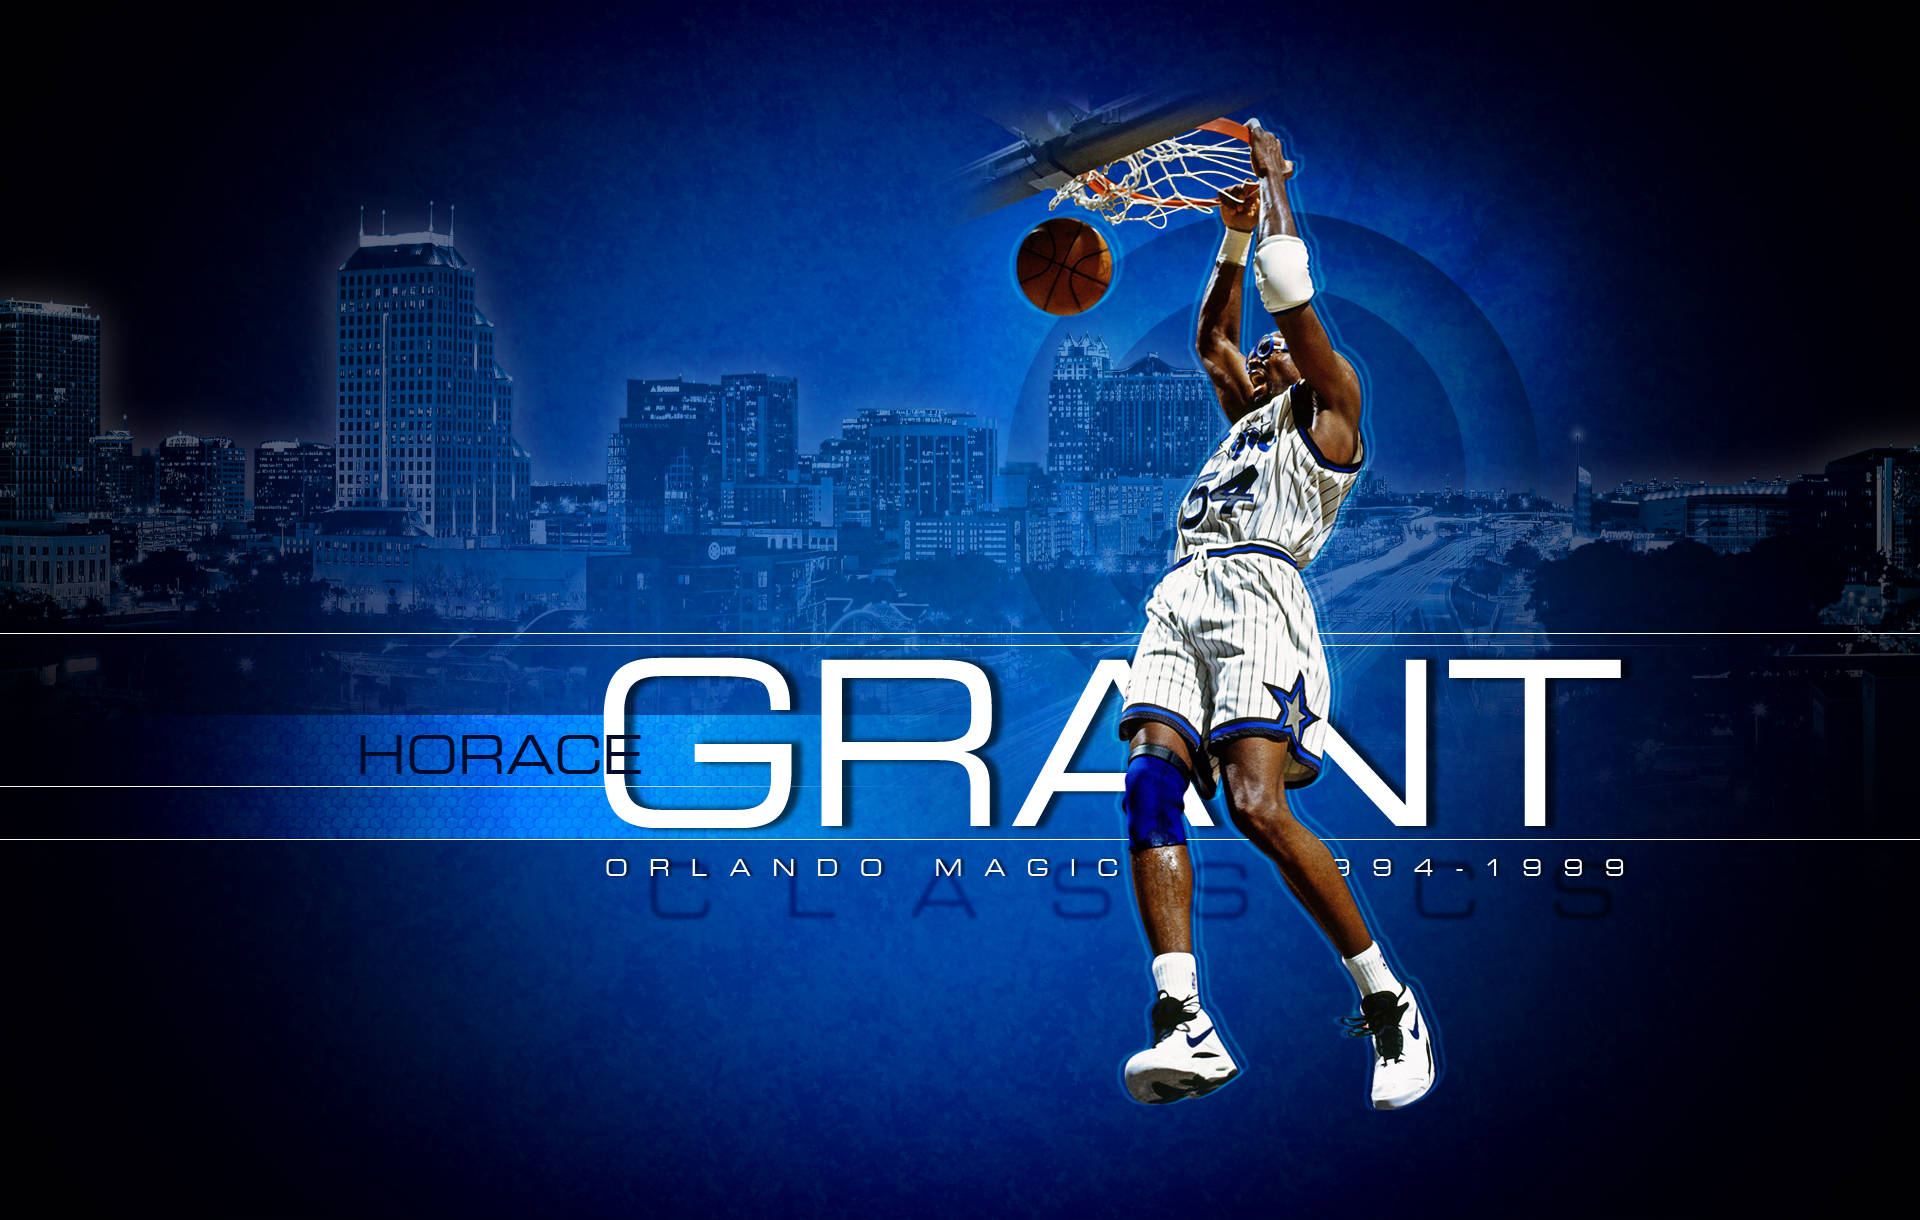 Orland Magic Horace Grant Cover wallpaper